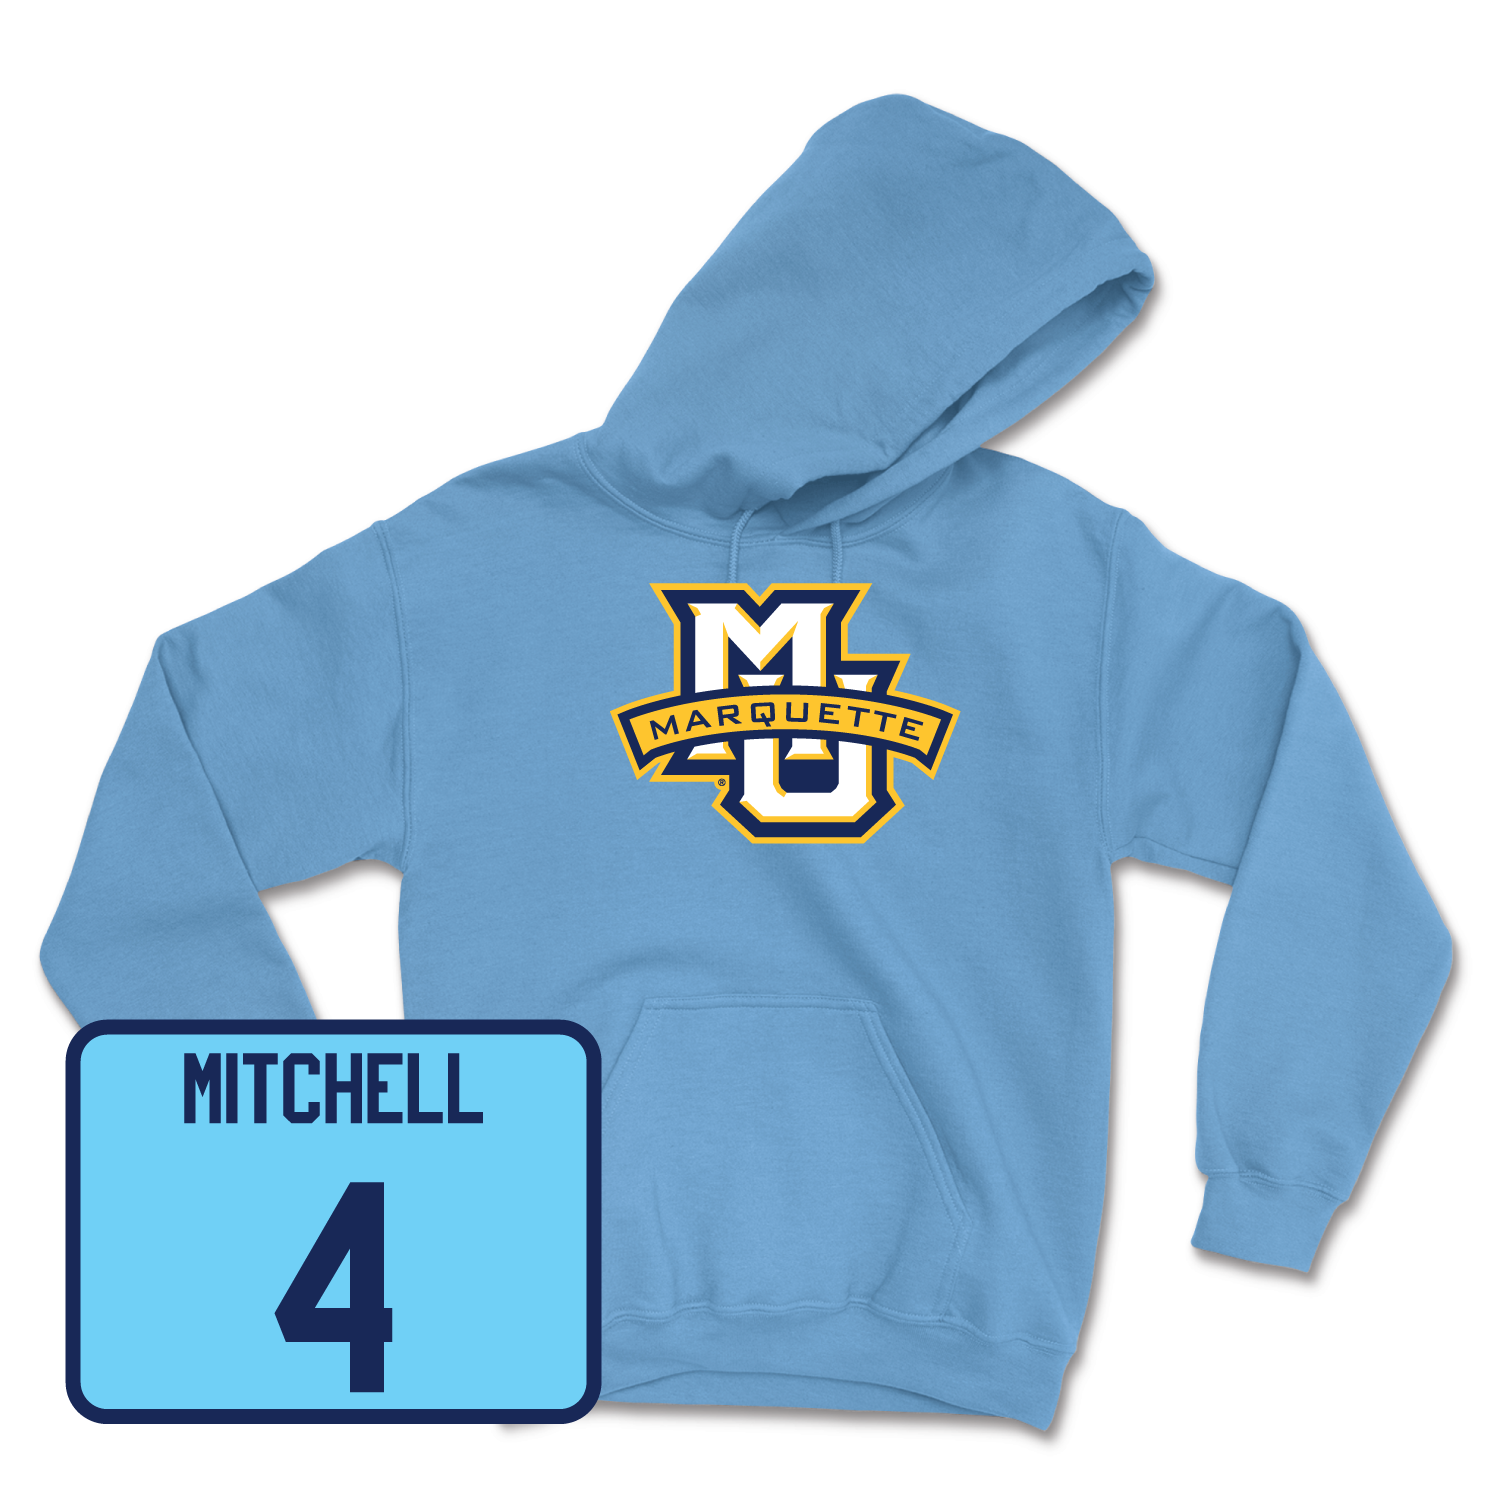 Championship Blue Men's Basketball Marquette Hoodie 2 4X-Large / Stevie Mitchell | #4